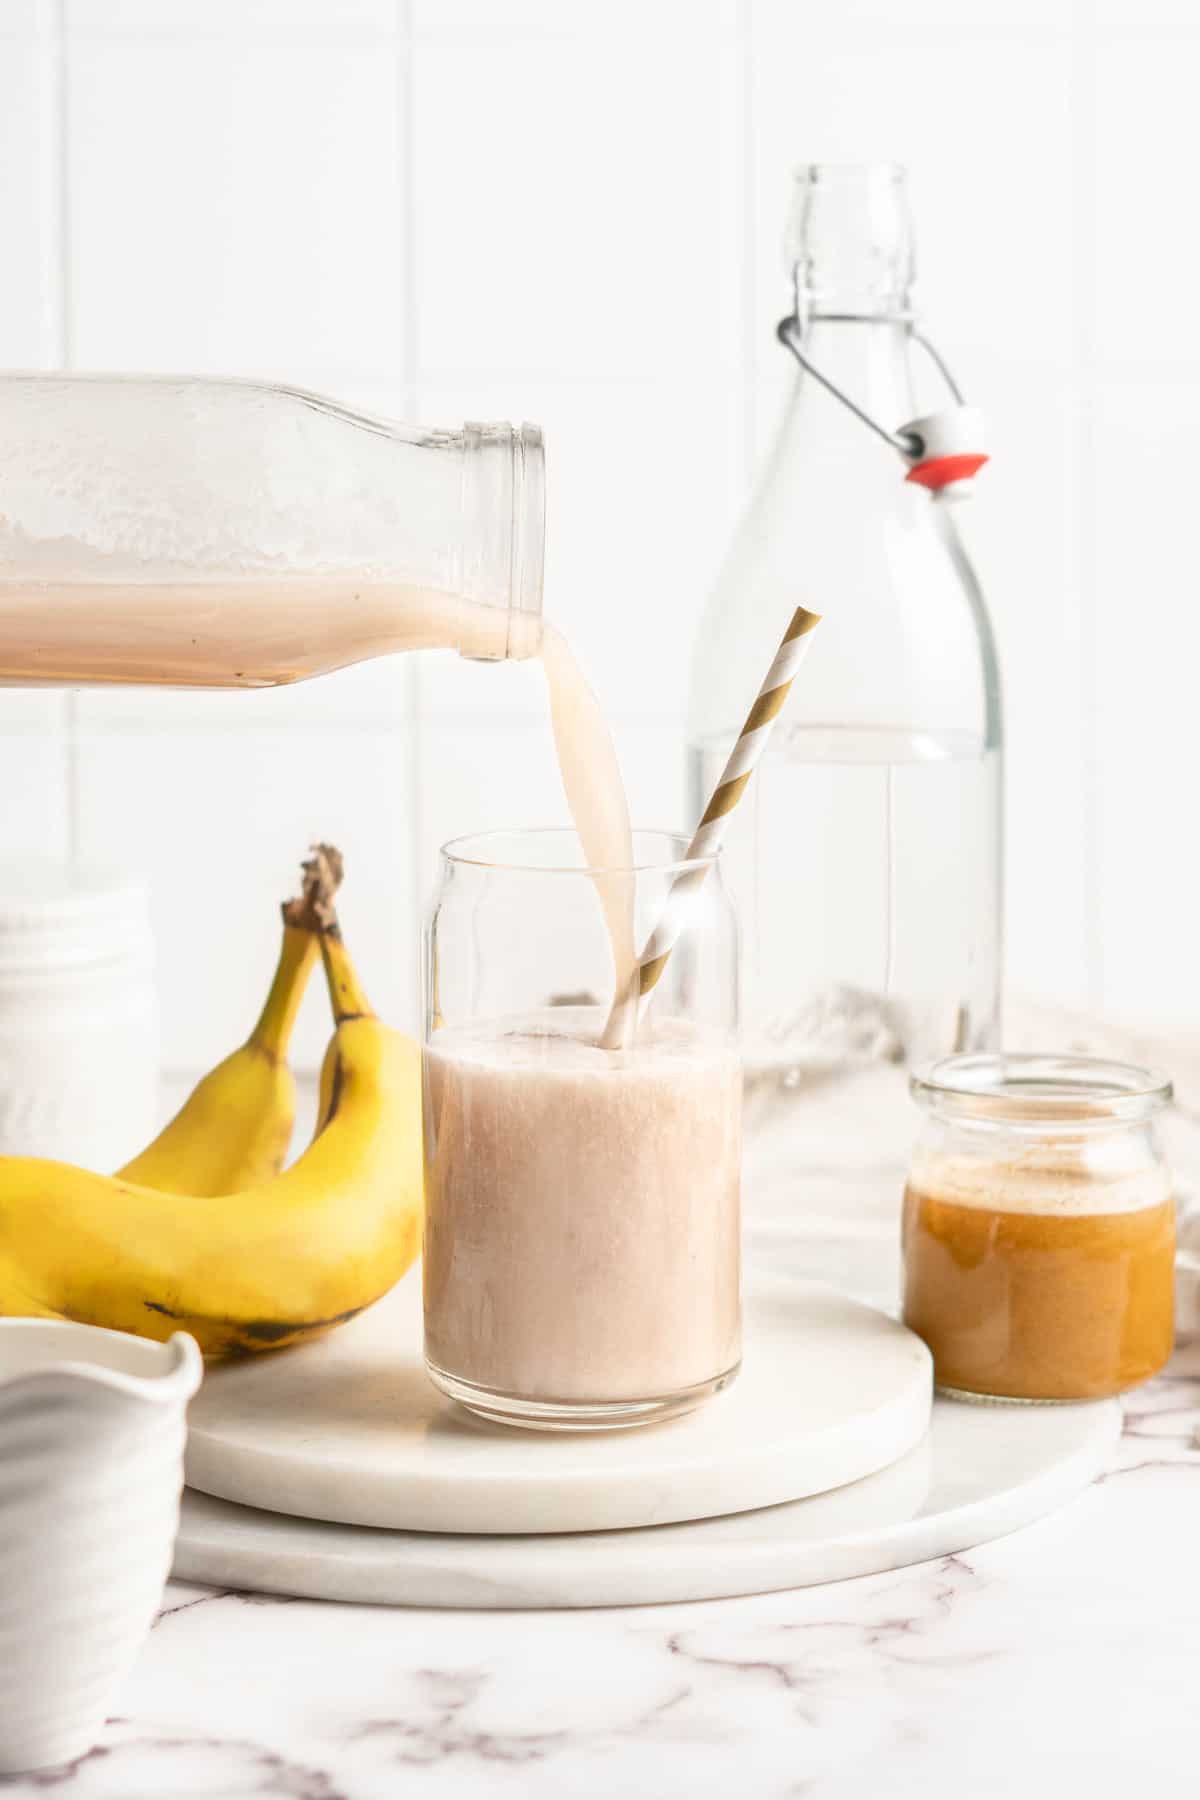 Banana milk being poured into jar with straw